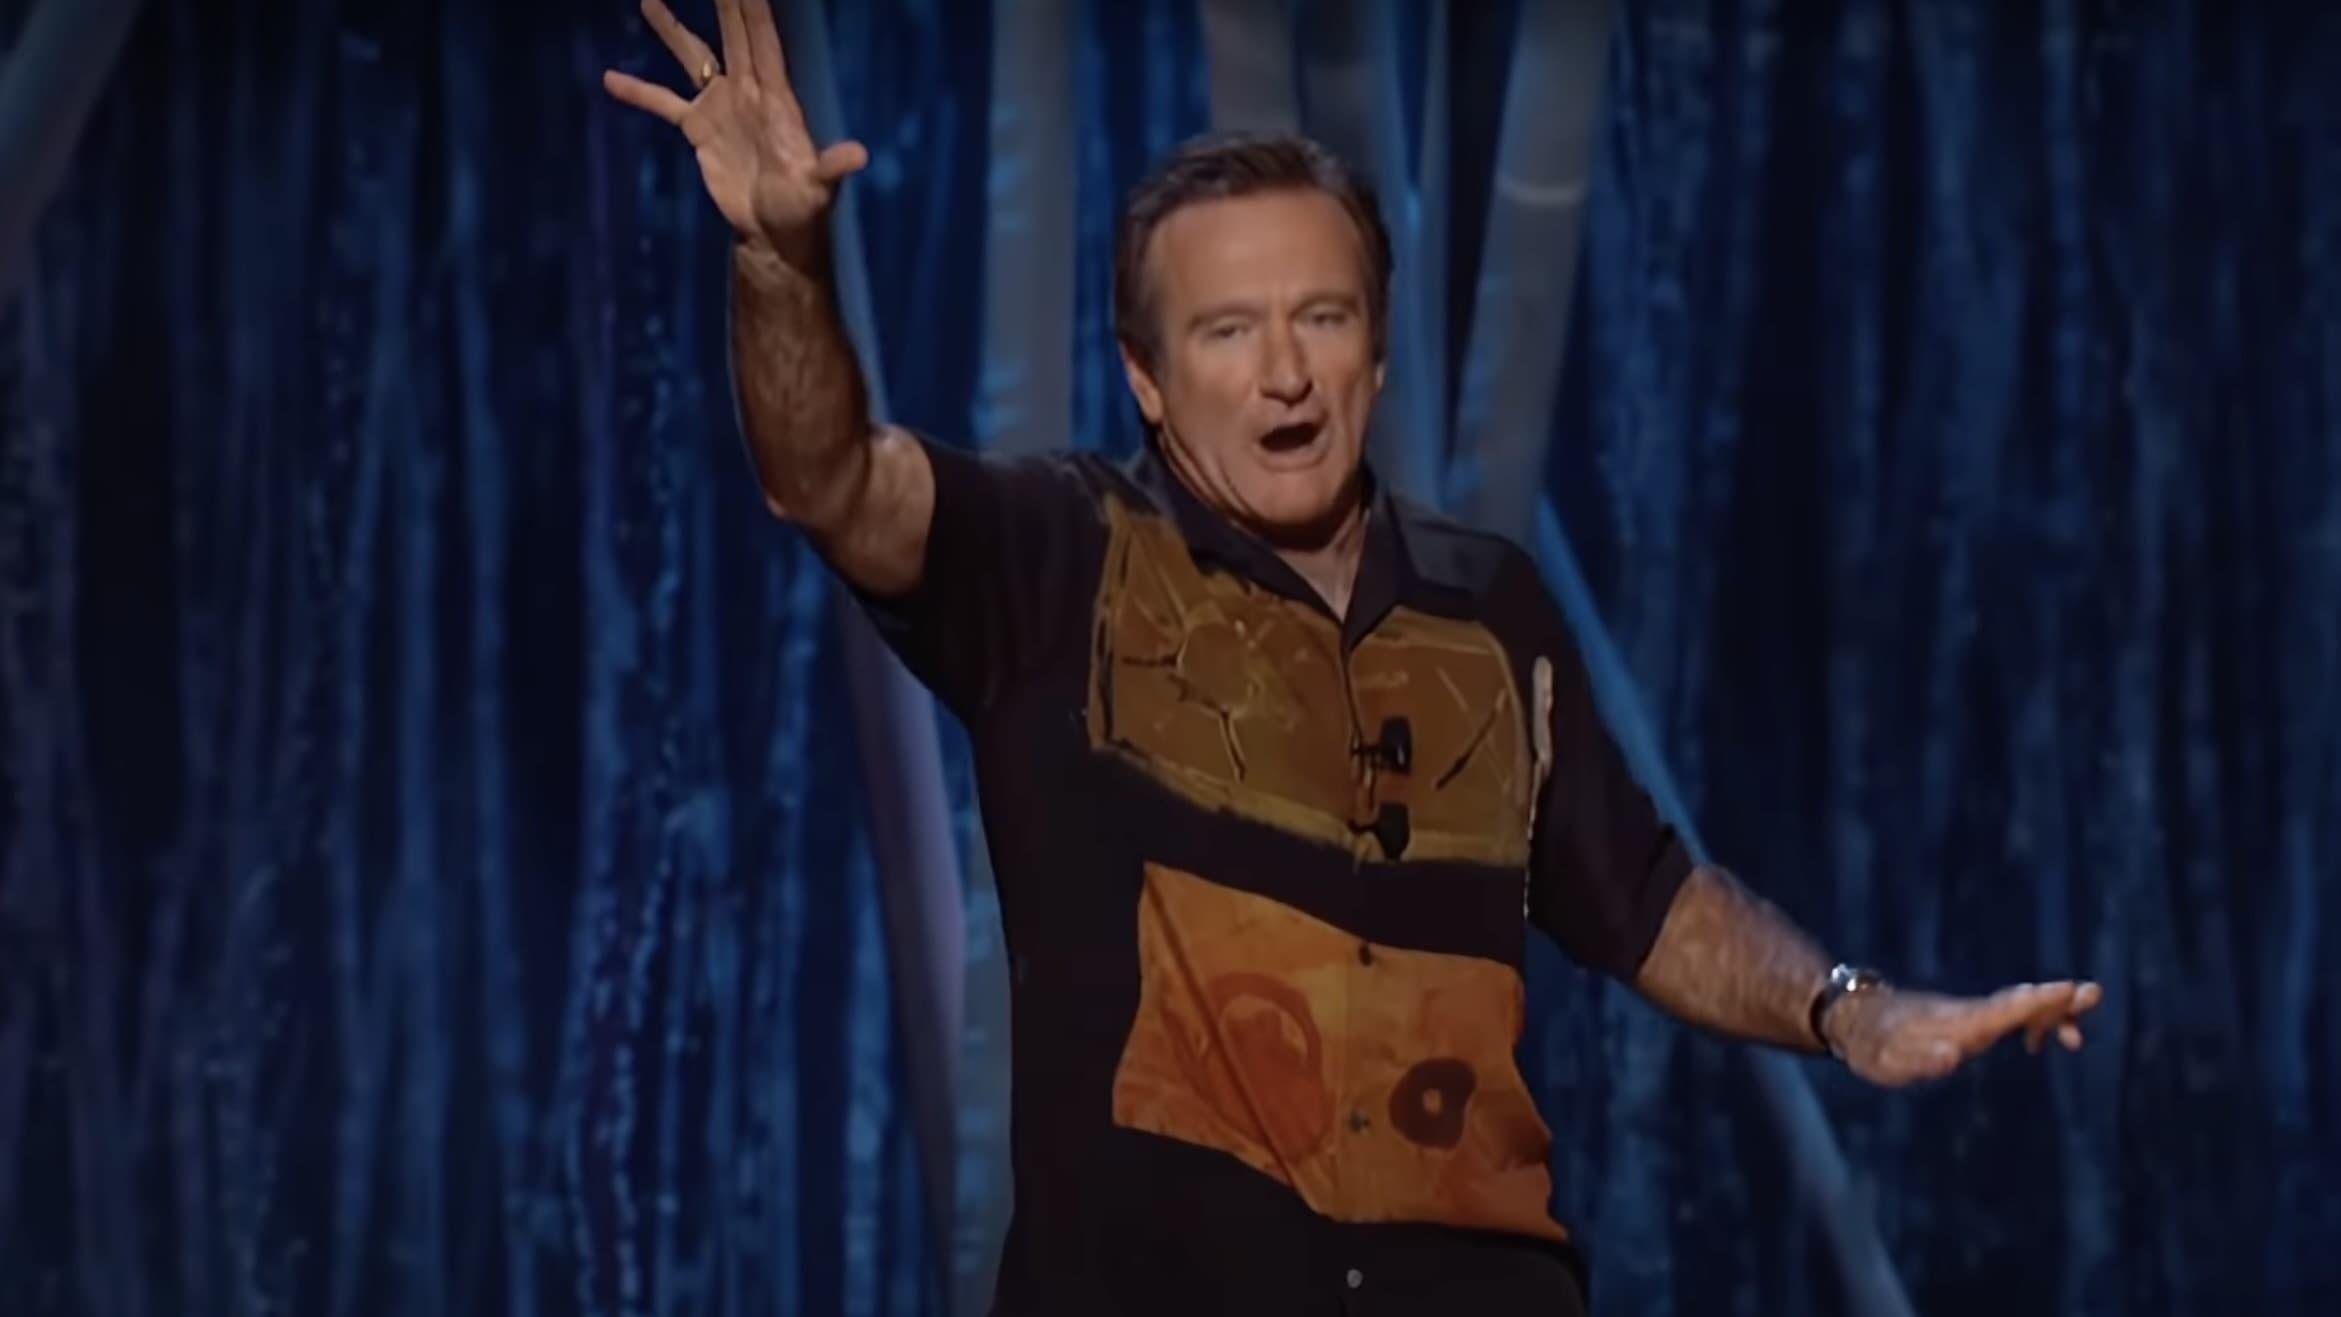 Robin Williams: Live on Broadway backdrop